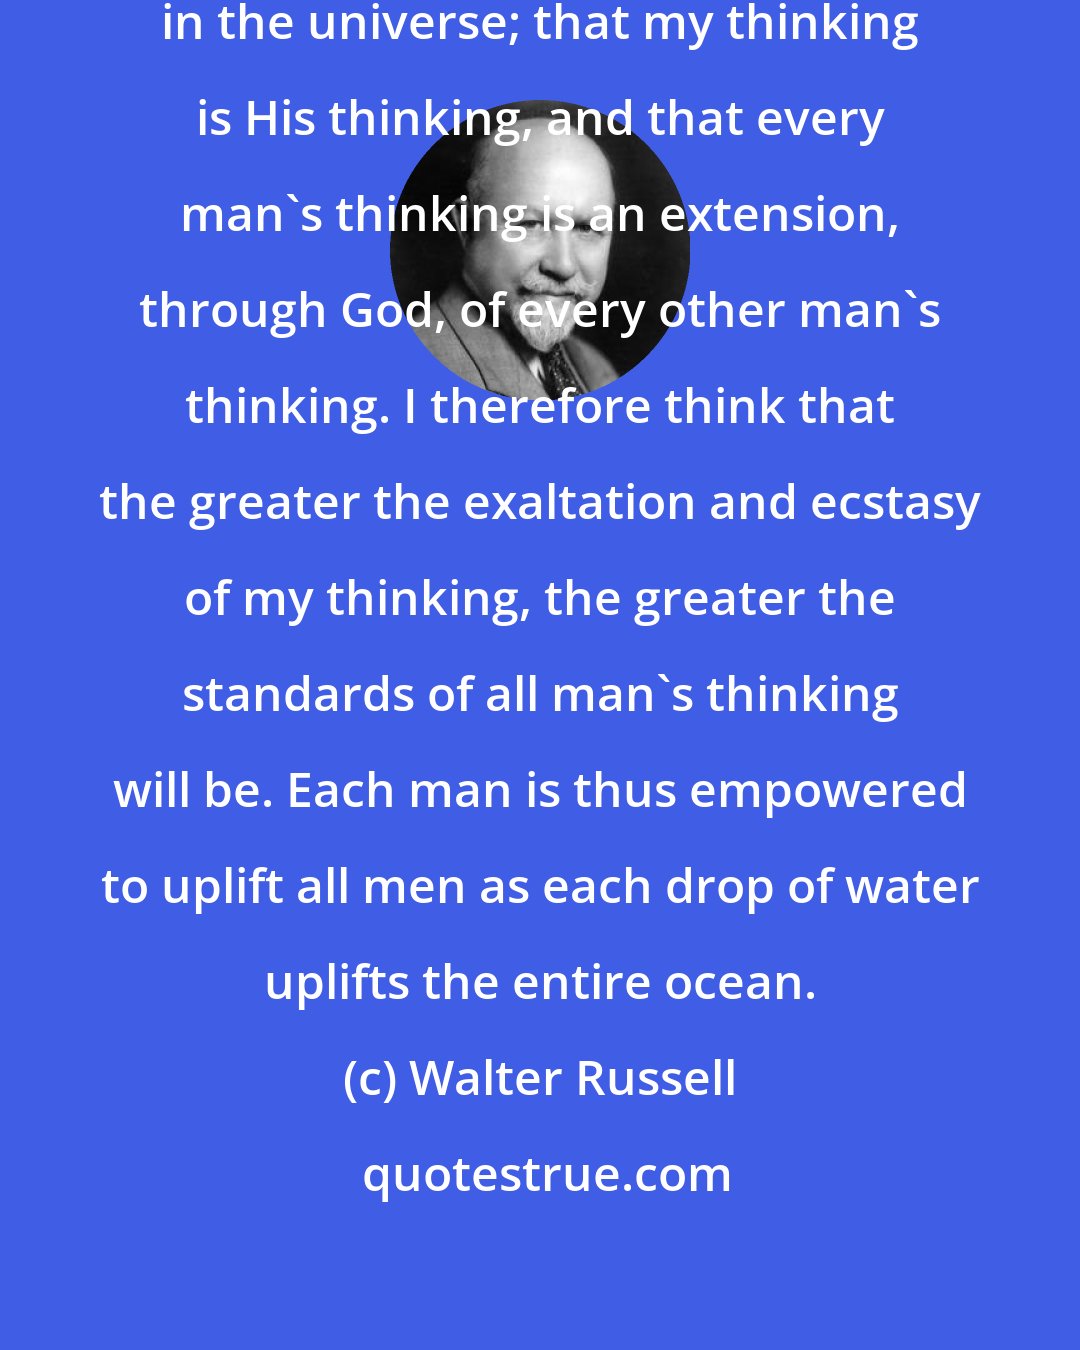 Walter Russell: I believe that there is but One Thinker in the universe; that my thinking is His thinking, and that every man's thinking is an extension, through God, of every other man's thinking. I therefore think that the greater the exaltation and ecstasy of my thinking, the greater the standards of all man's thinking will be. Each man is thus empowered to uplift all men as each drop of water uplifts the entire ocean.